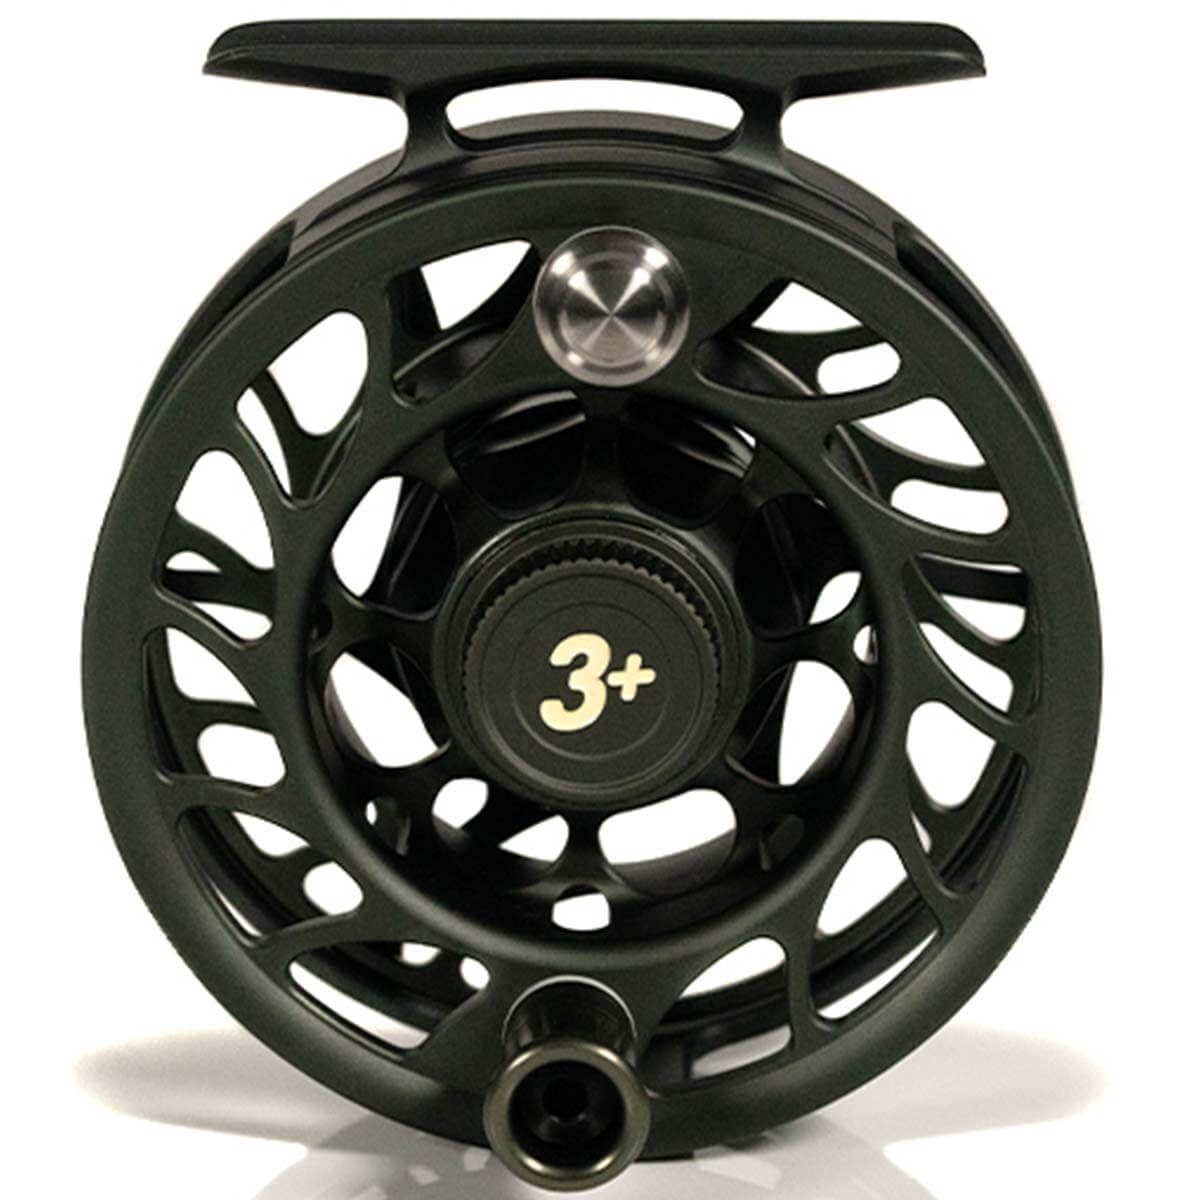 An in-depth look at the Hatch Iconic Fly Reel – Bear's Den Fly